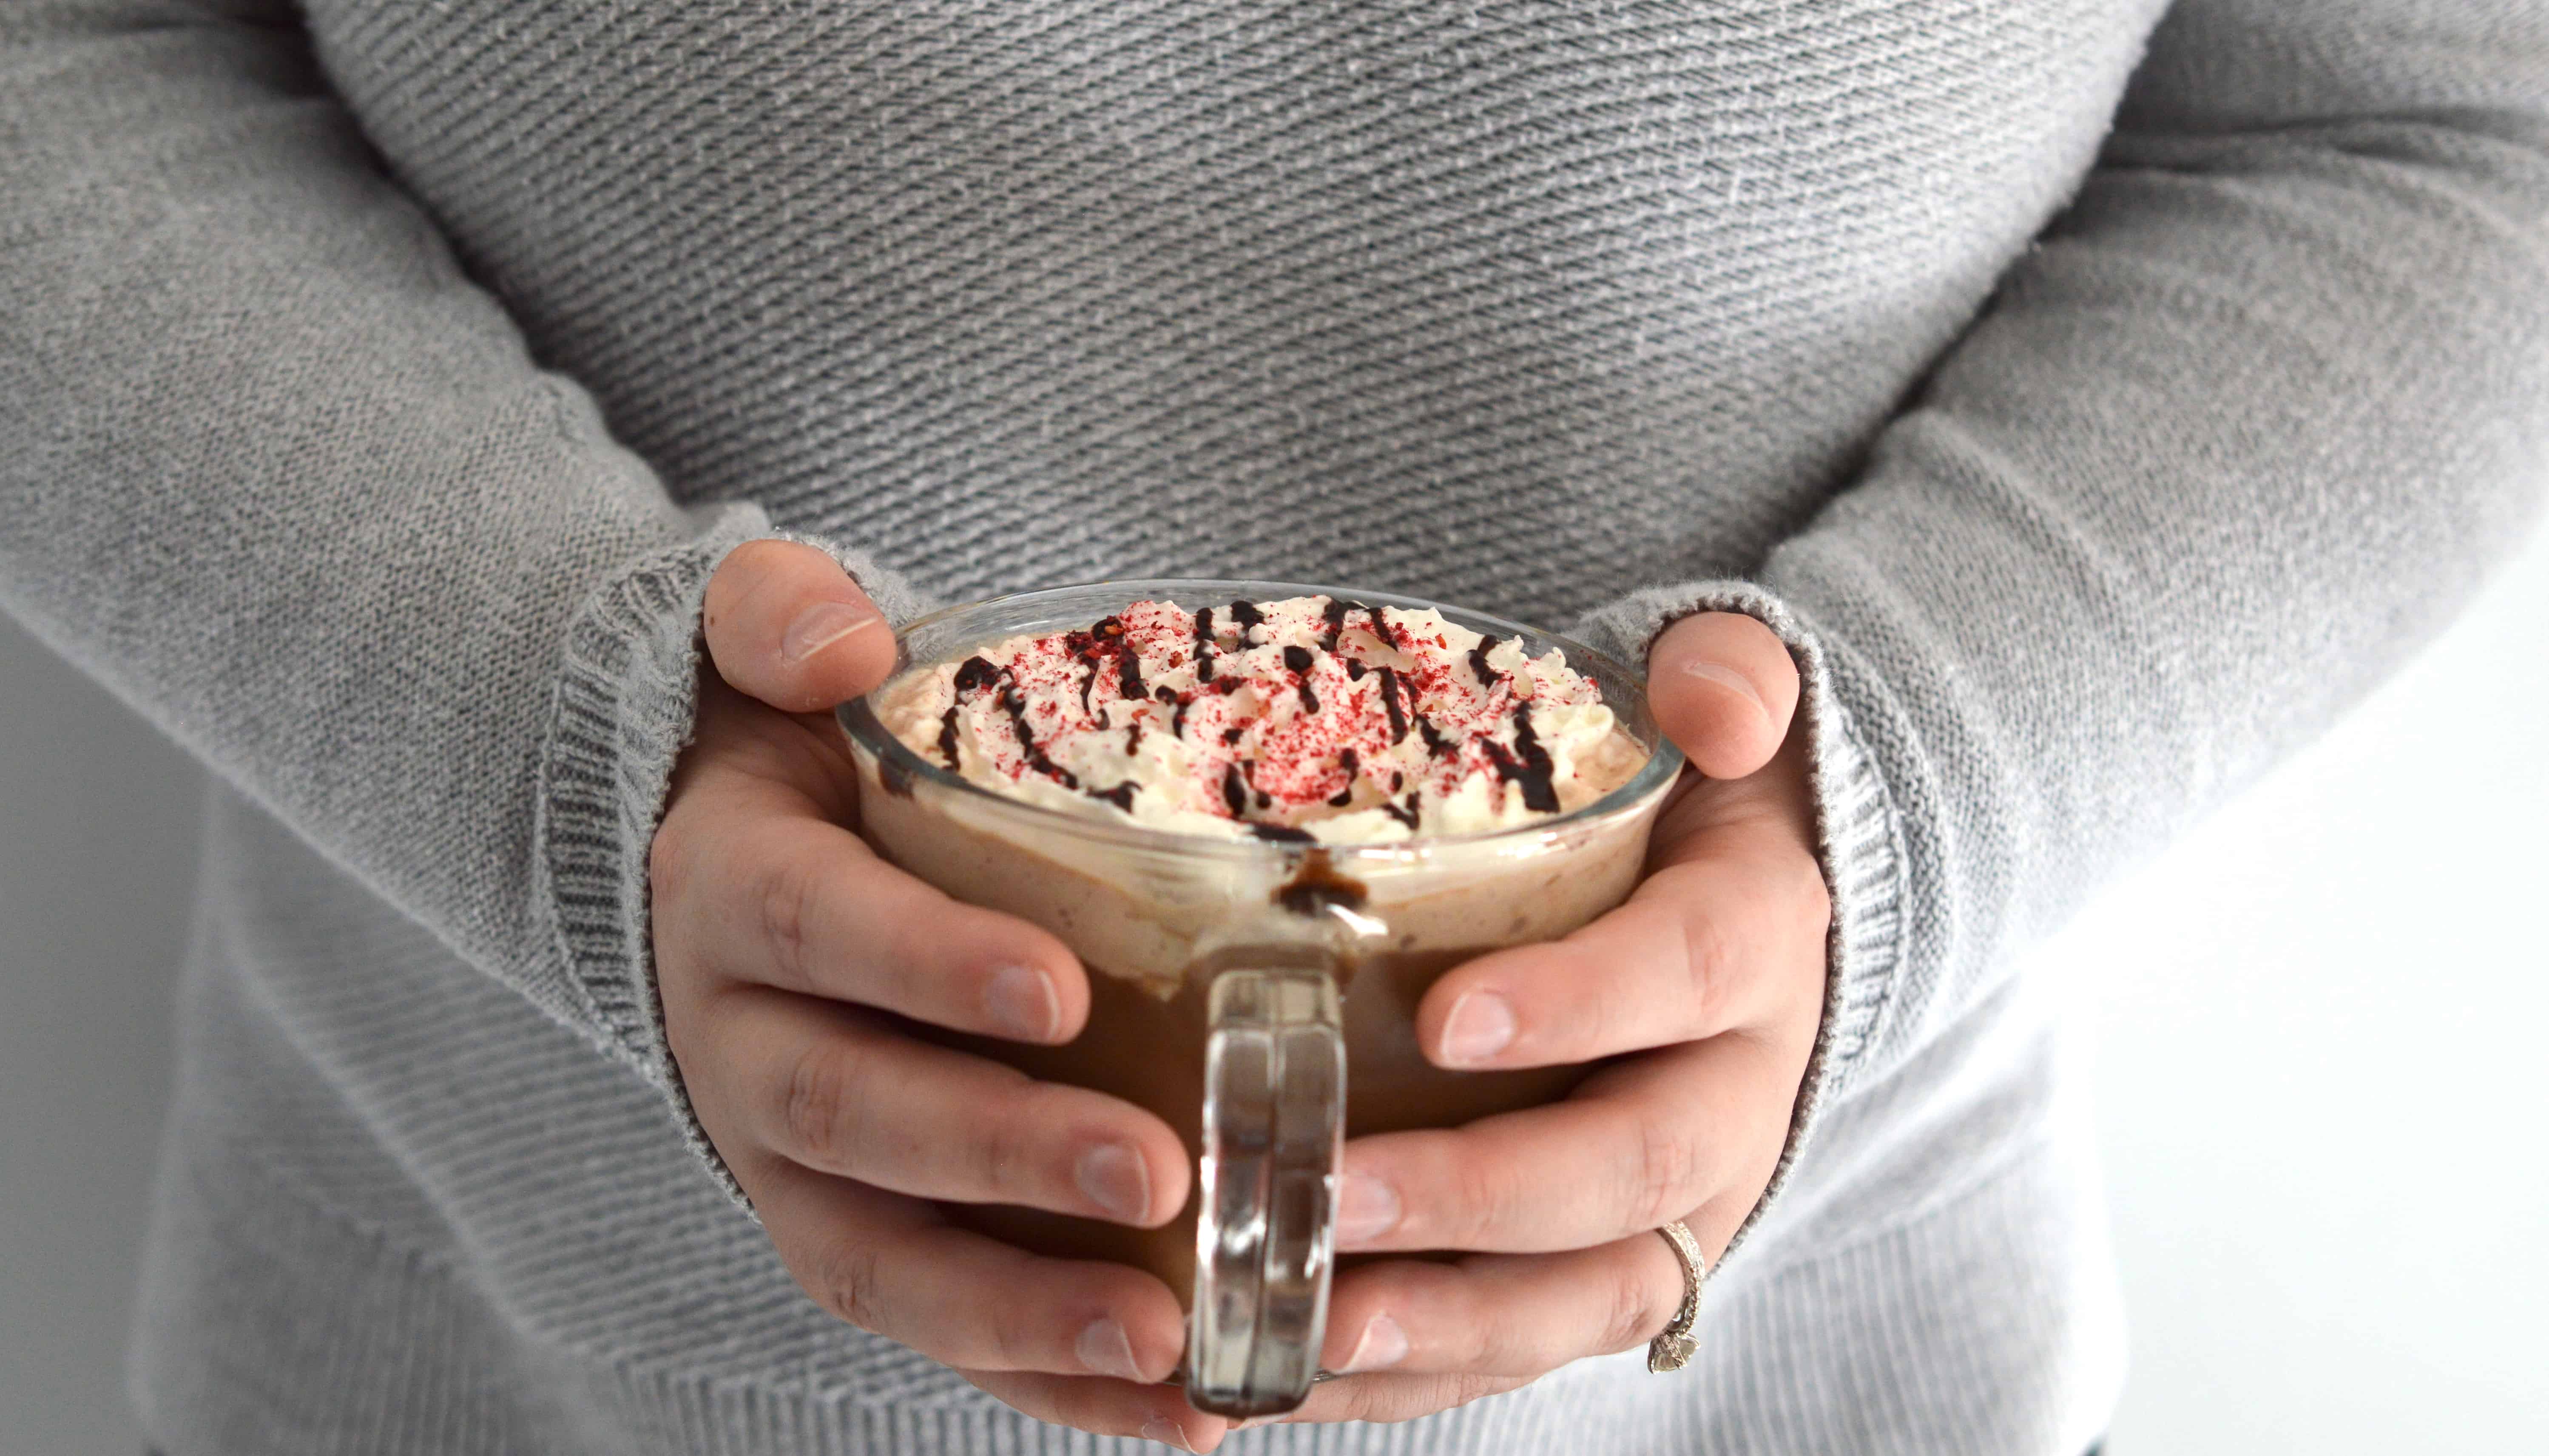 This decadent and rich Raspberry Mocha hits all the right notes - deeply chocolaty and rich, slightly sweet from raspberries and topped with cool whipped cream. Make your own coffeehouse favorite at home for a fraction of the cost.